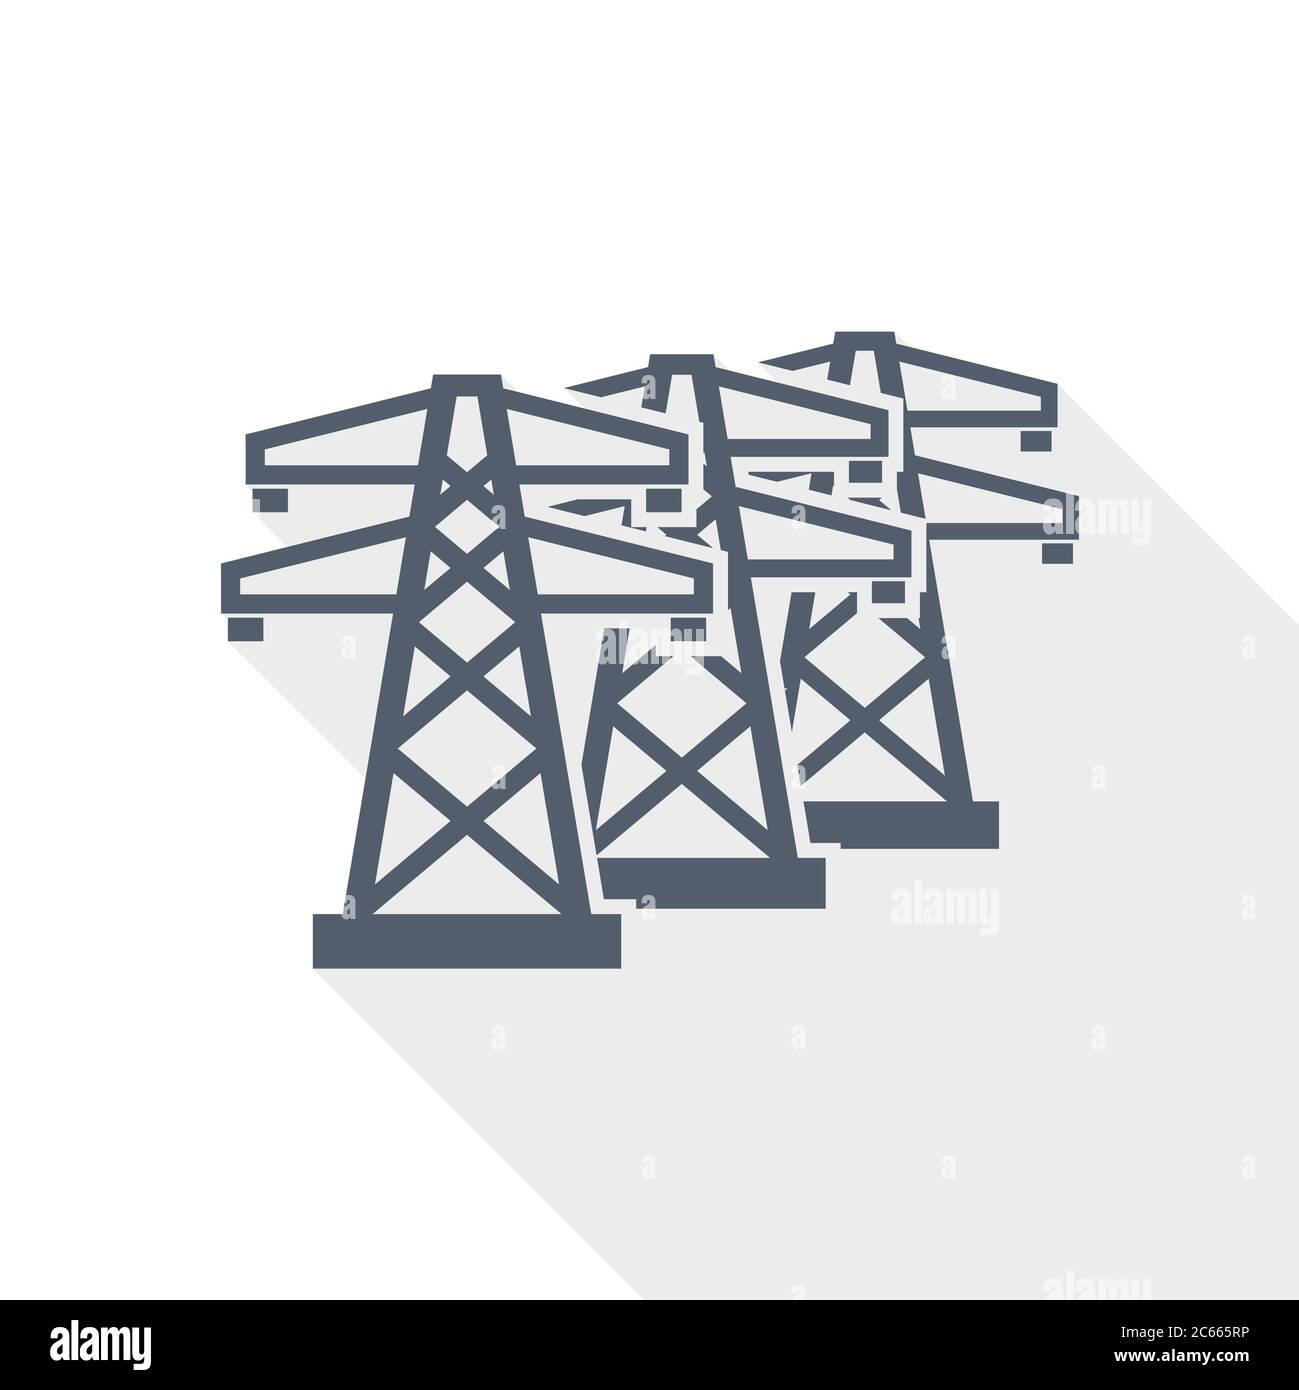 Power line, energy towers flat design vector icon Stock Vector